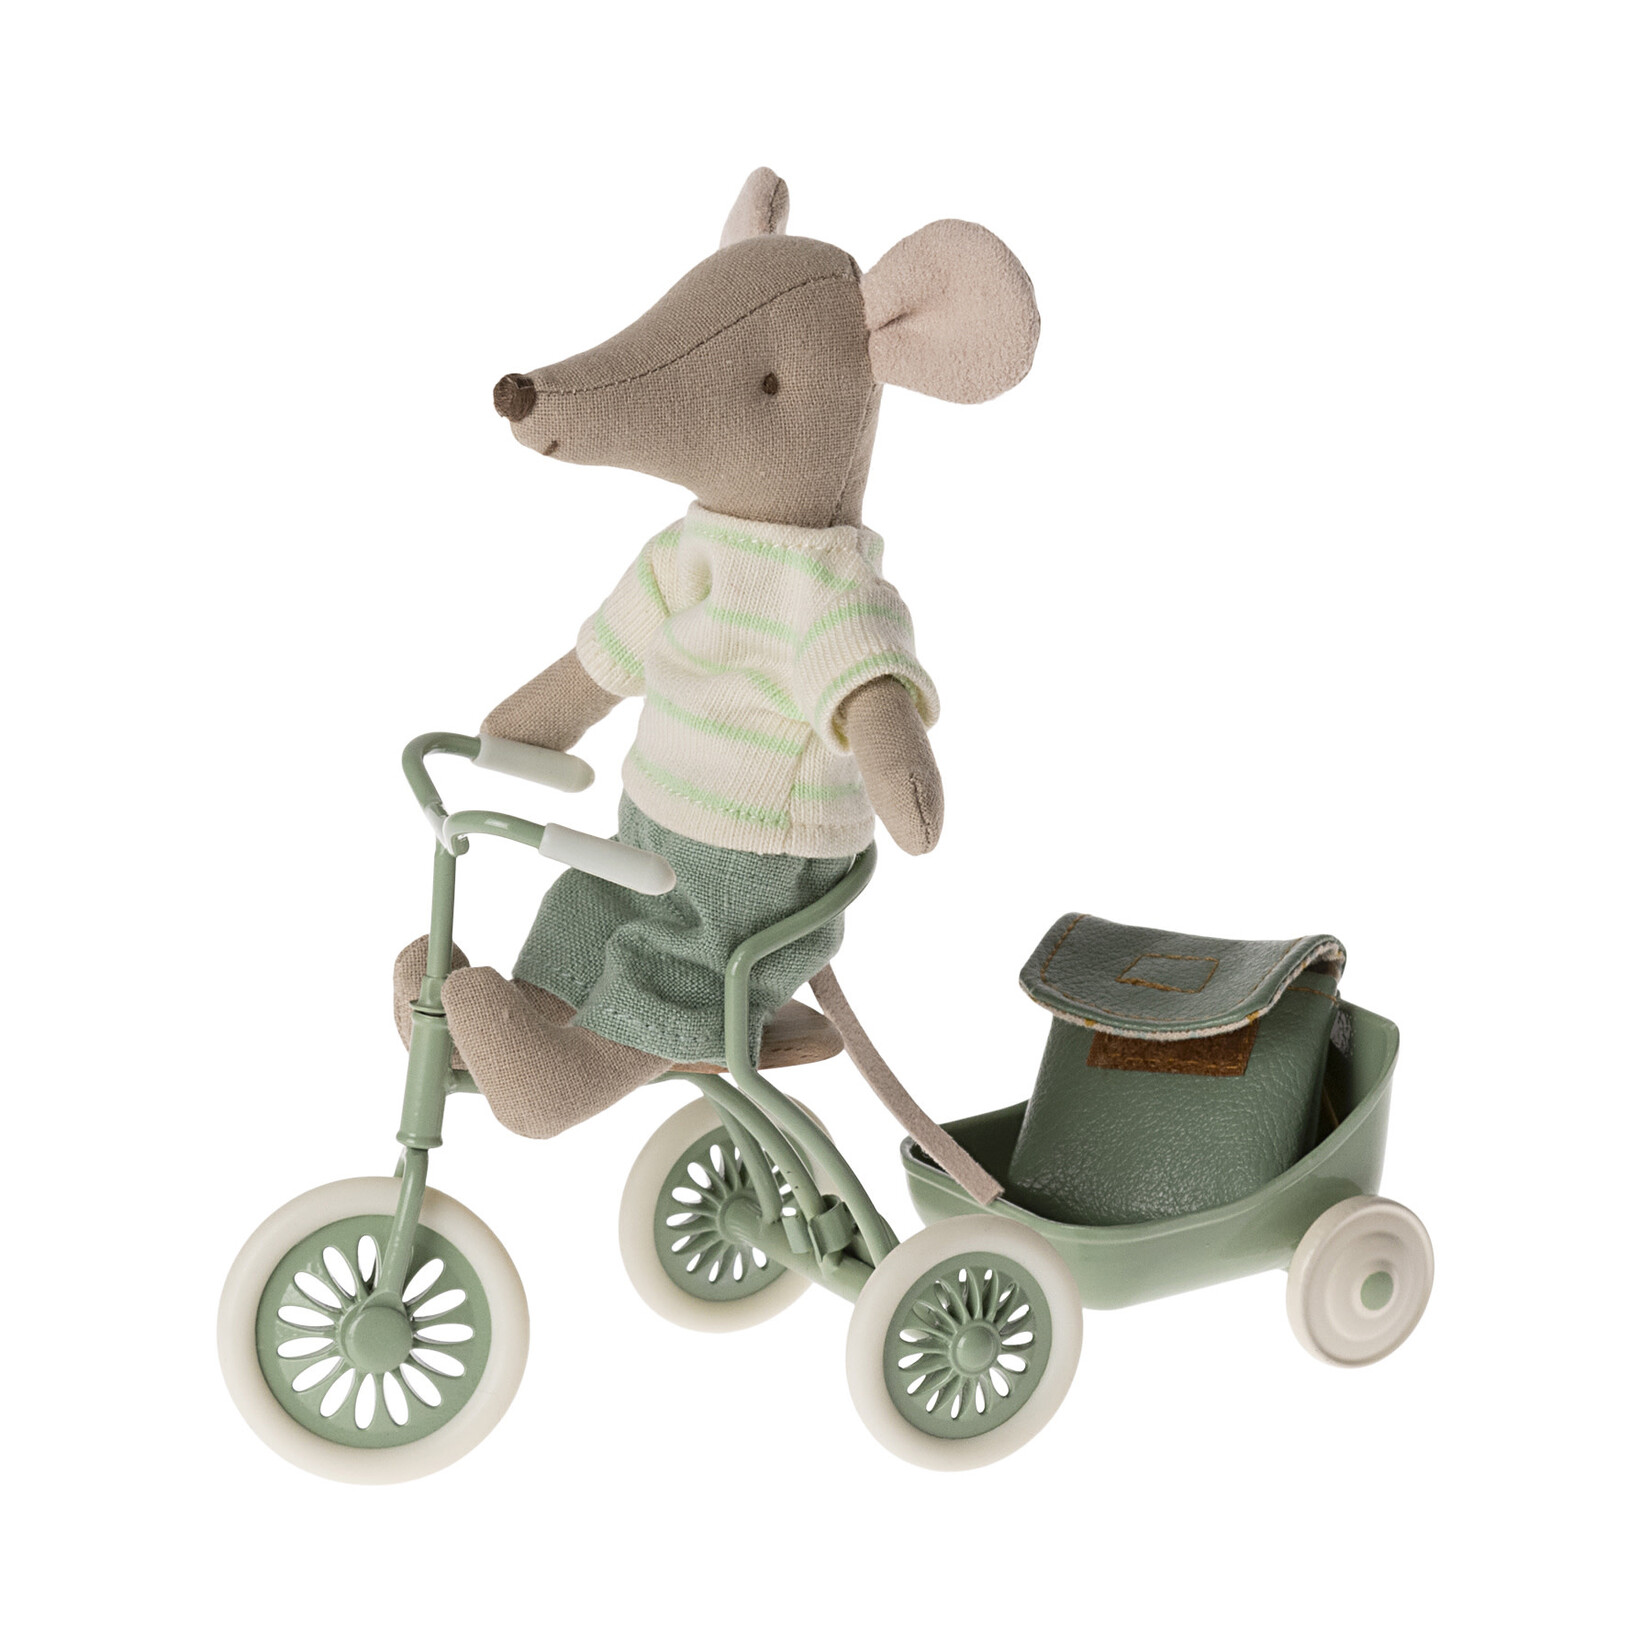 Maileg PRE ORDER Maileg Tricycle bike mouse Big brother - Green - Estimated arrival mid June